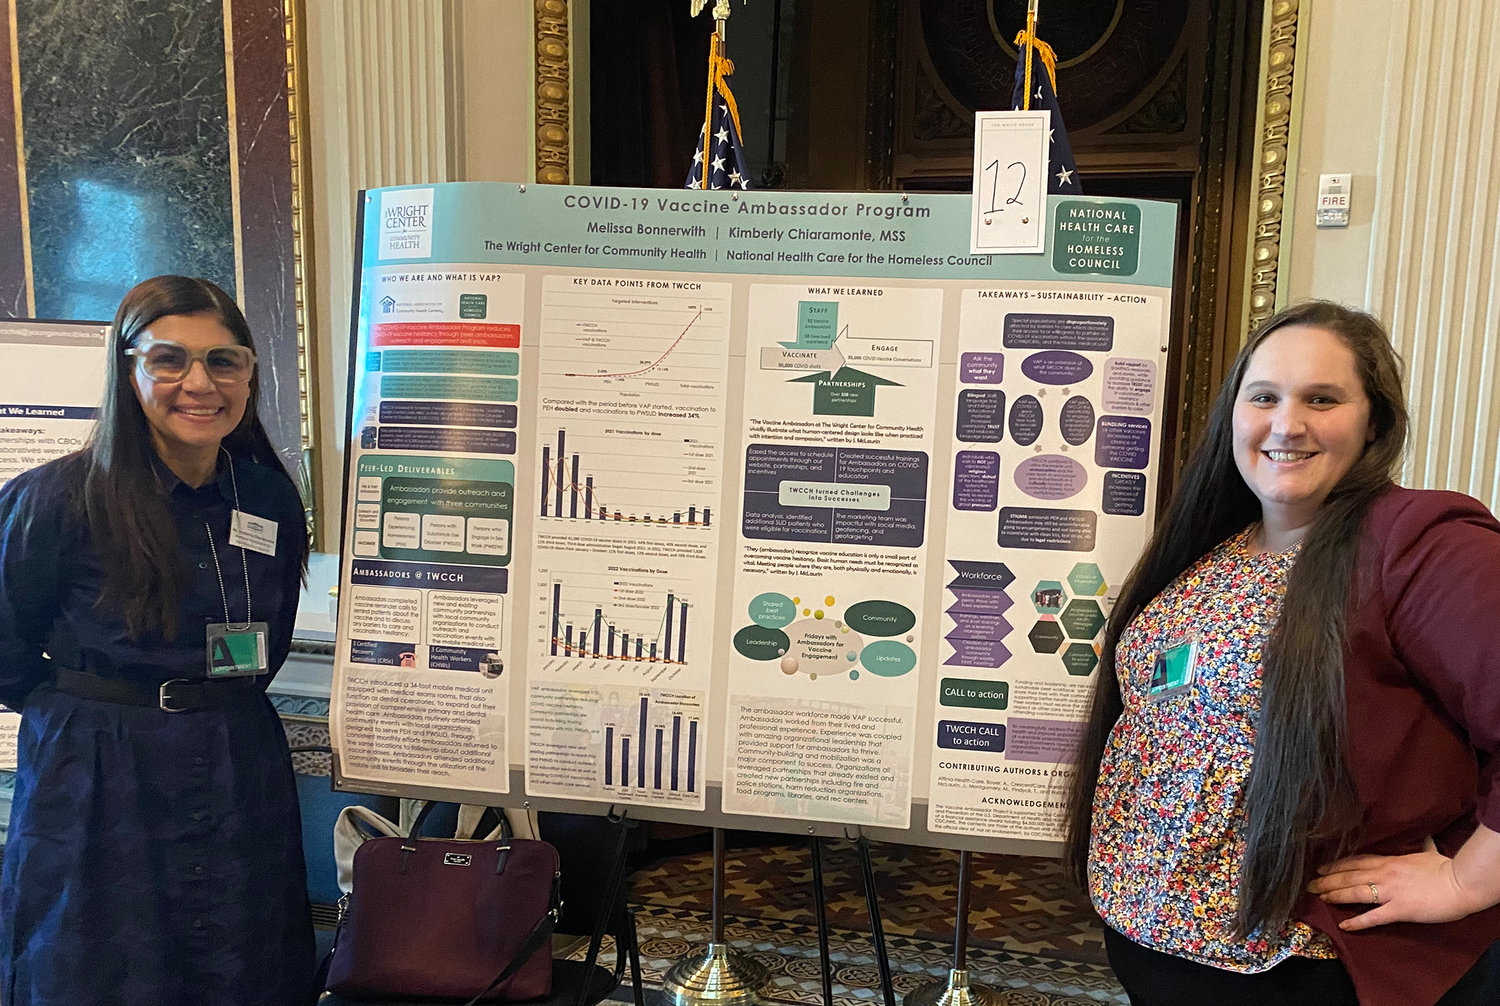 Melissa Bonnerwith, right, project manager of public health education and AmeriCorps VISTA at the Wright Center, co-presented the research poster at the White House Eisenhower executive office building with Kimberly Chiaramonte, a senior project officer with the Homeless Council.